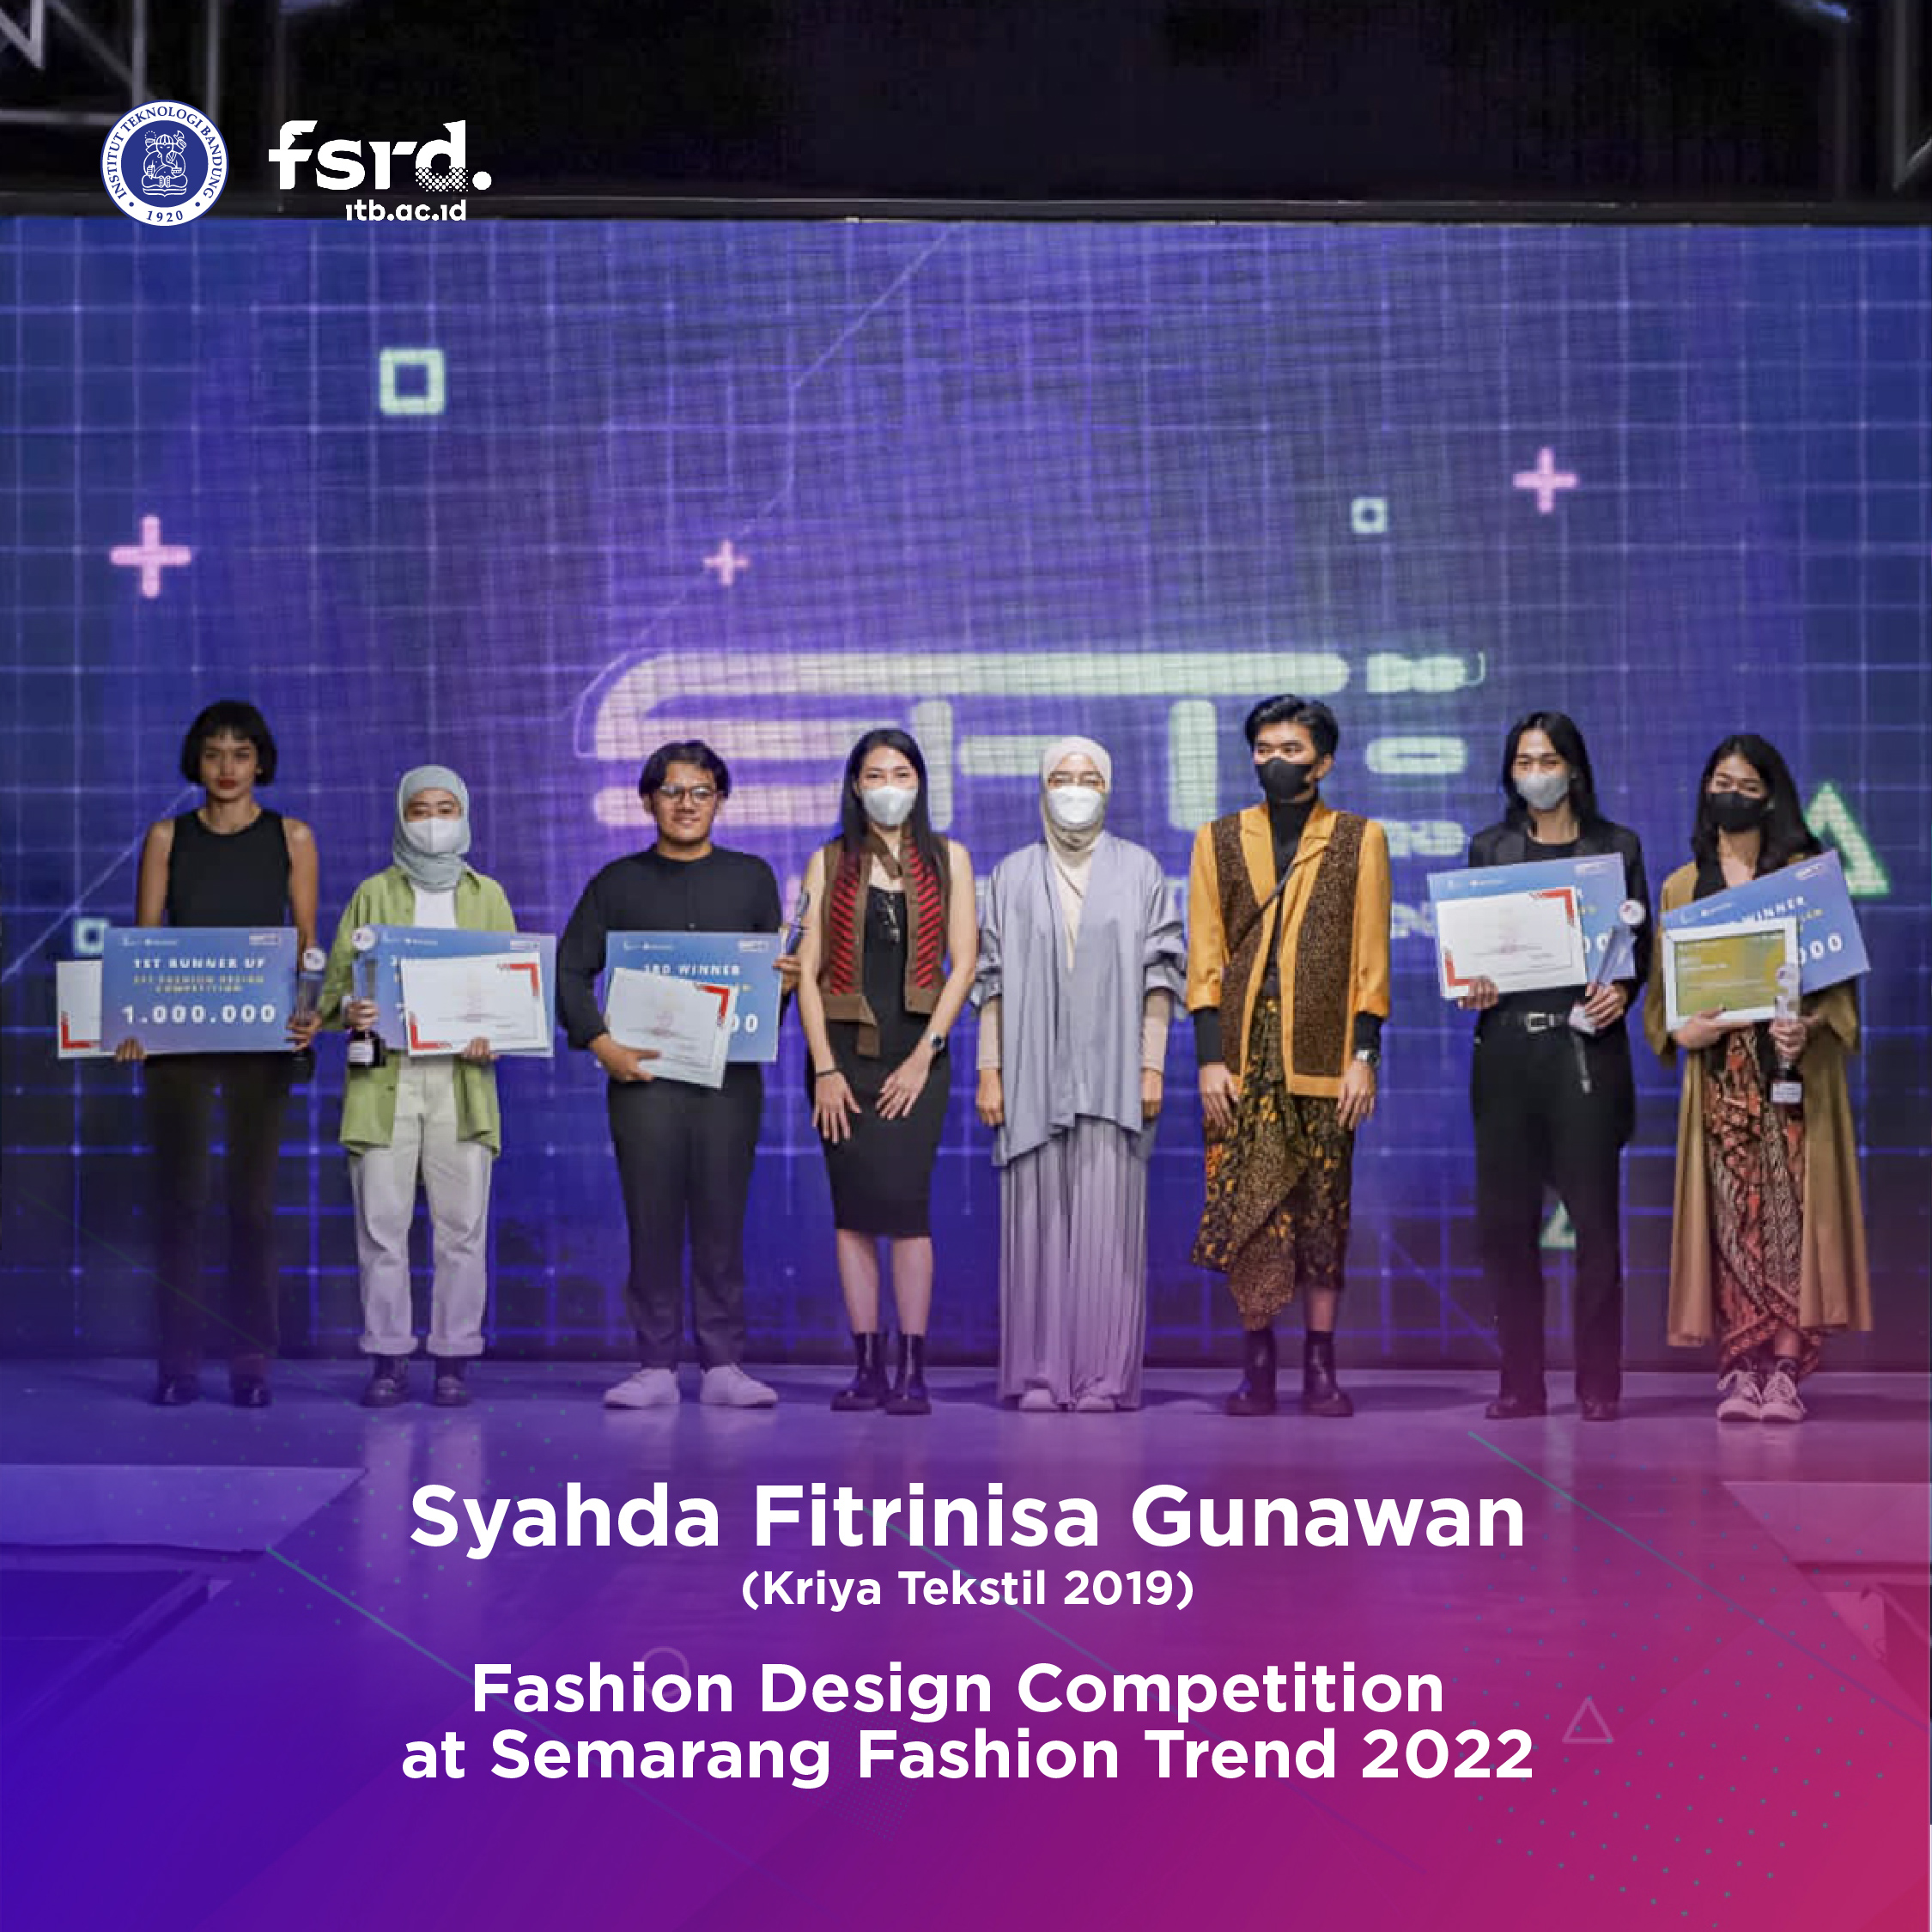 Syahda Fitrinisa Gunawan from Textile Craft Major FSRD ITB participated in the Fashion Design Competition, Semarang Fashion Trend 2022